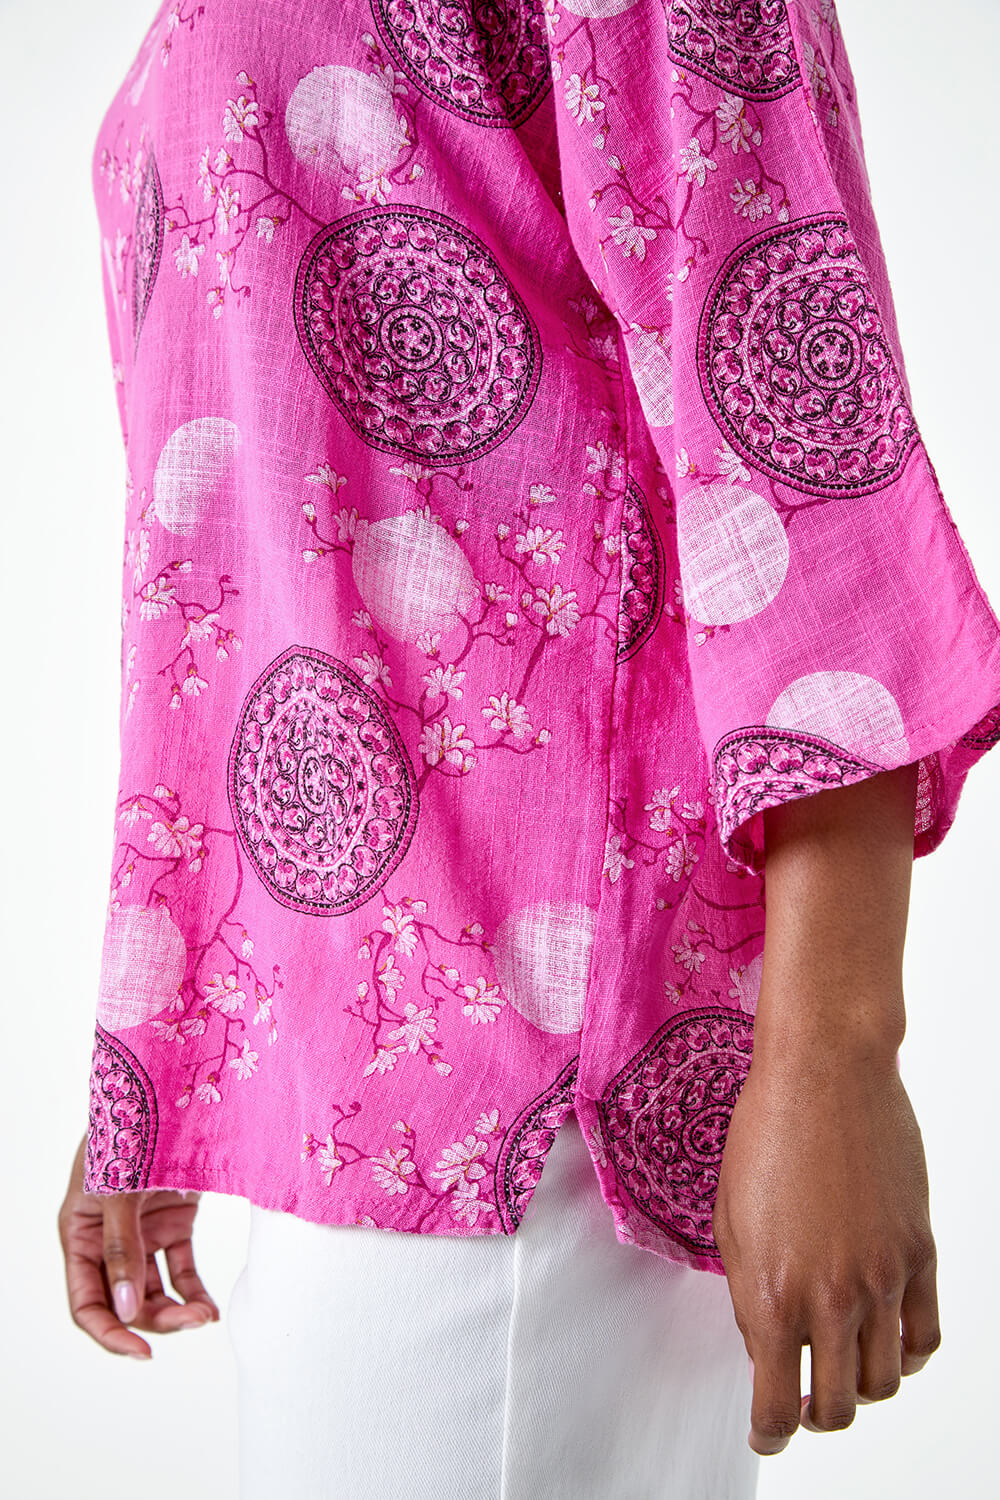 PINK Floral Embroidered Cotton Top with Necklace, Image 5 of 5